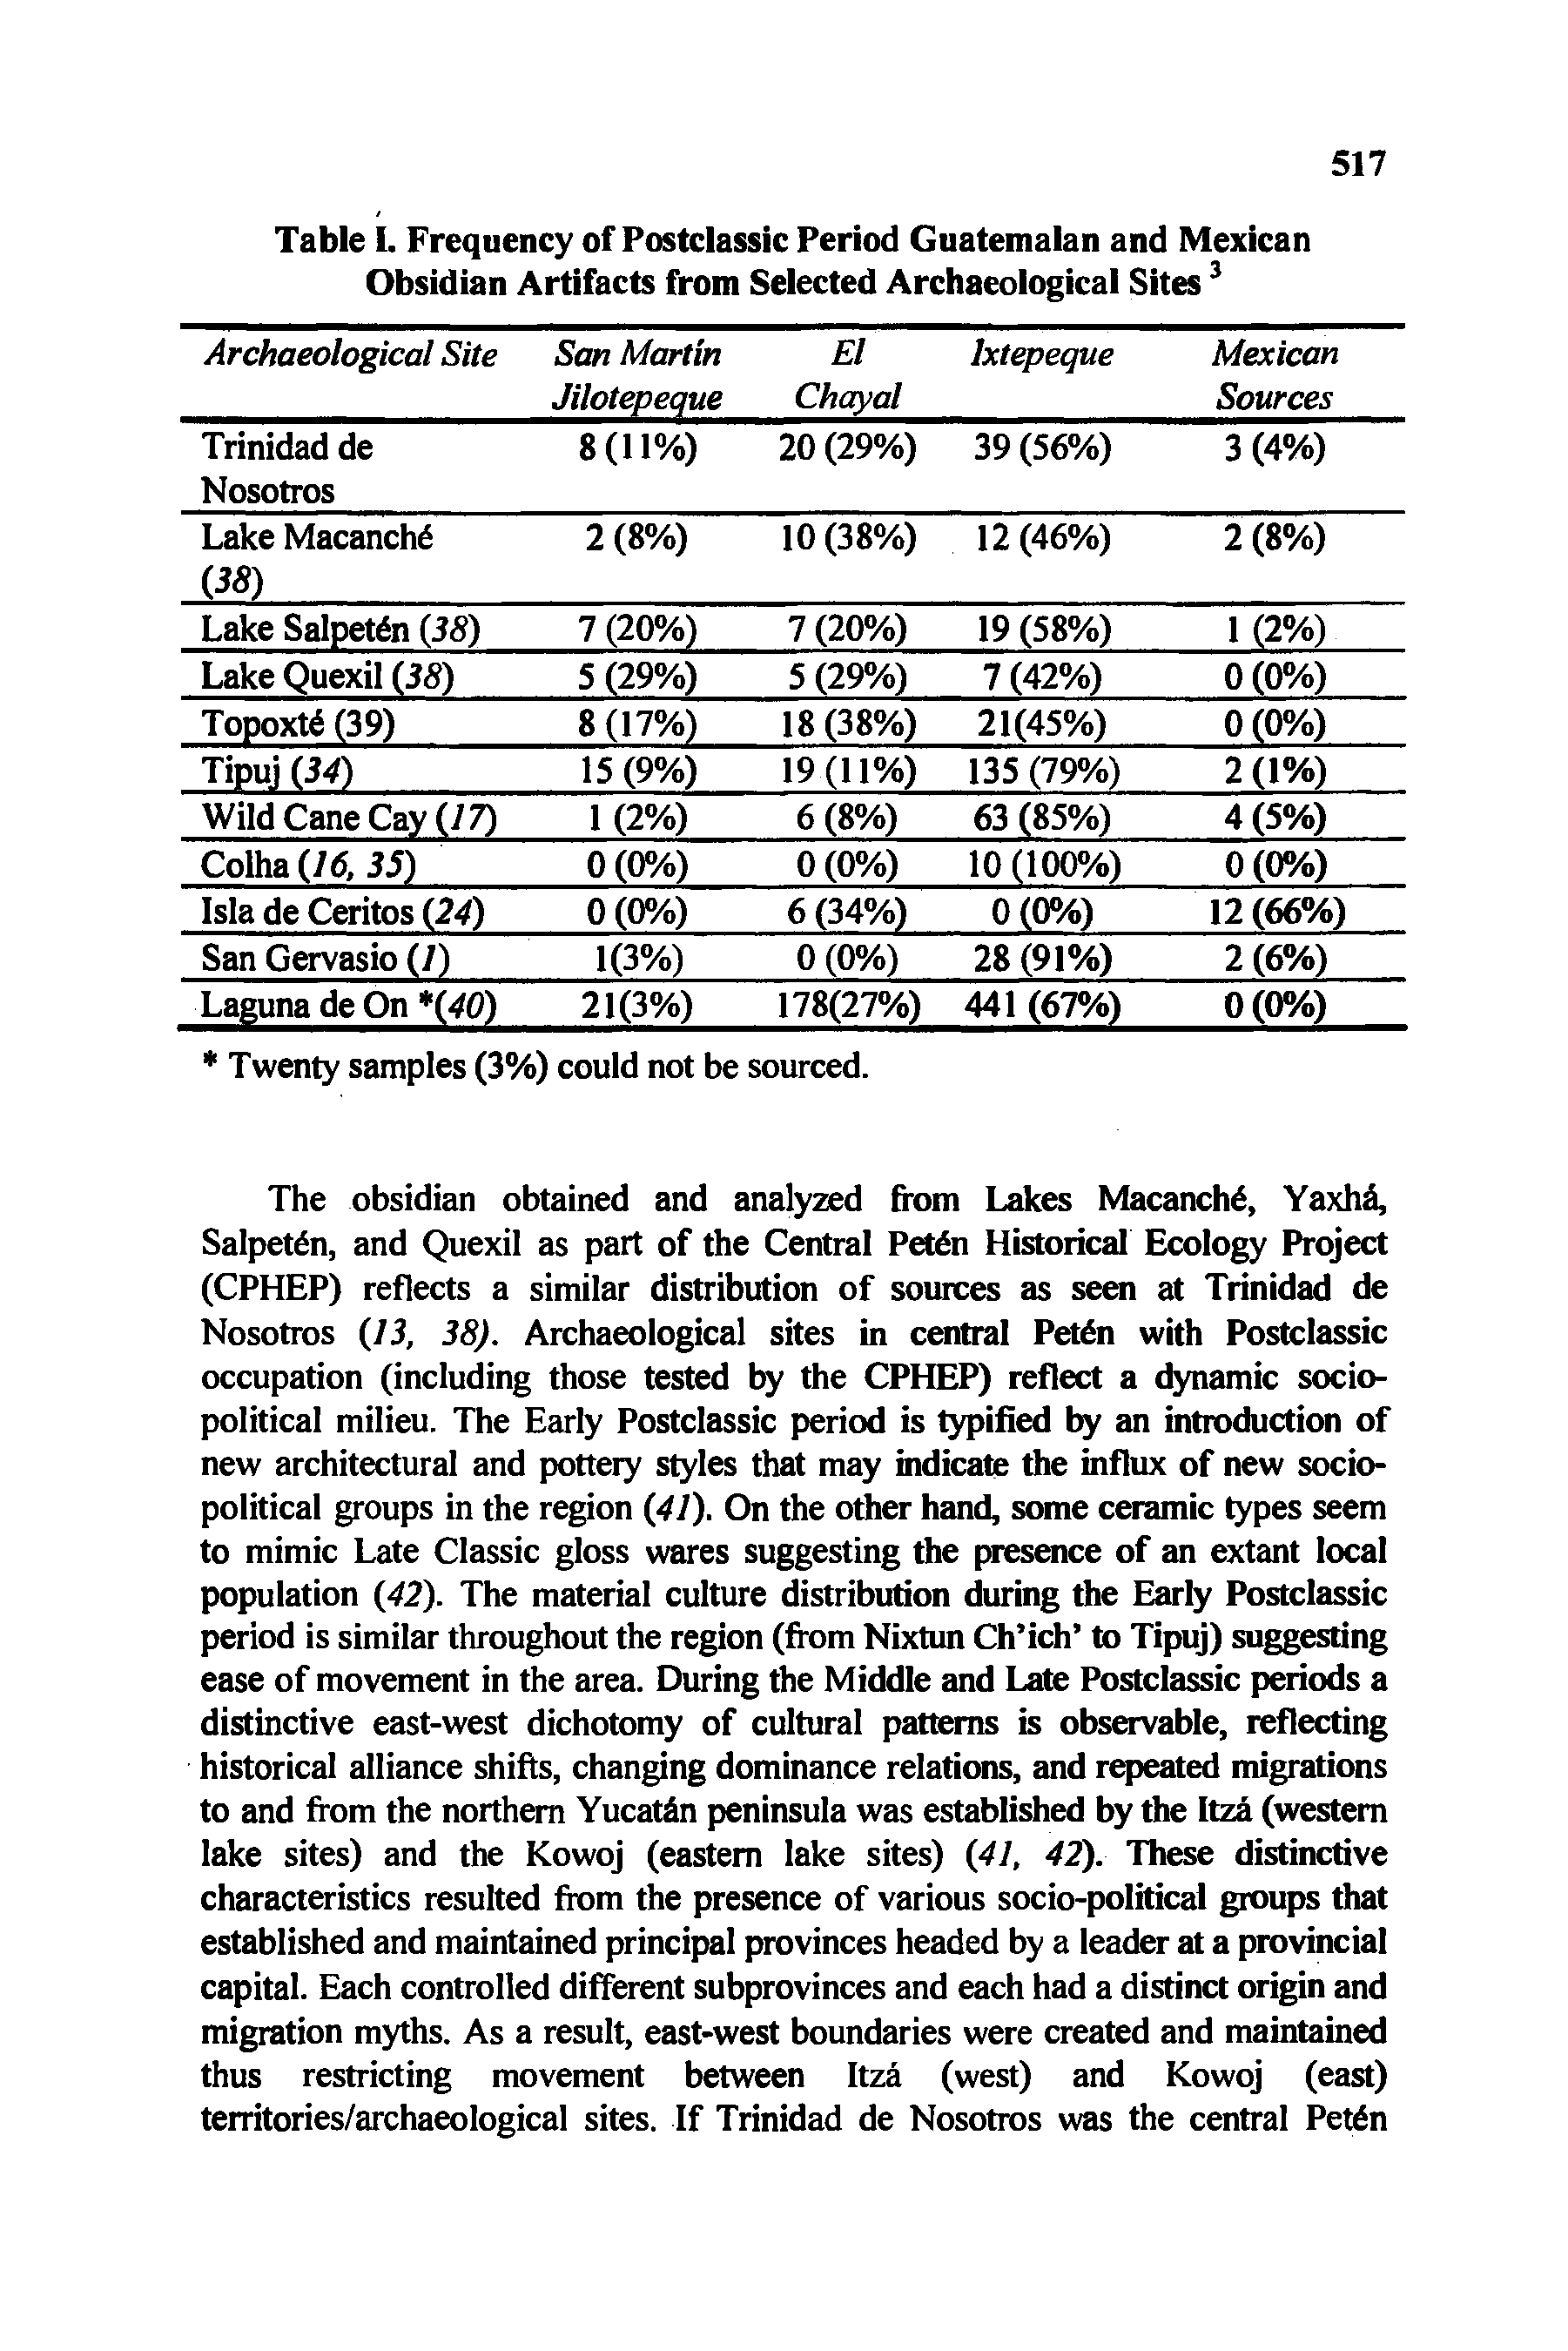 Table I. Frequency of Postclassic Period Guatemalan and Mexican Obsidian Artifacts from Selected Archaeological Sites3...